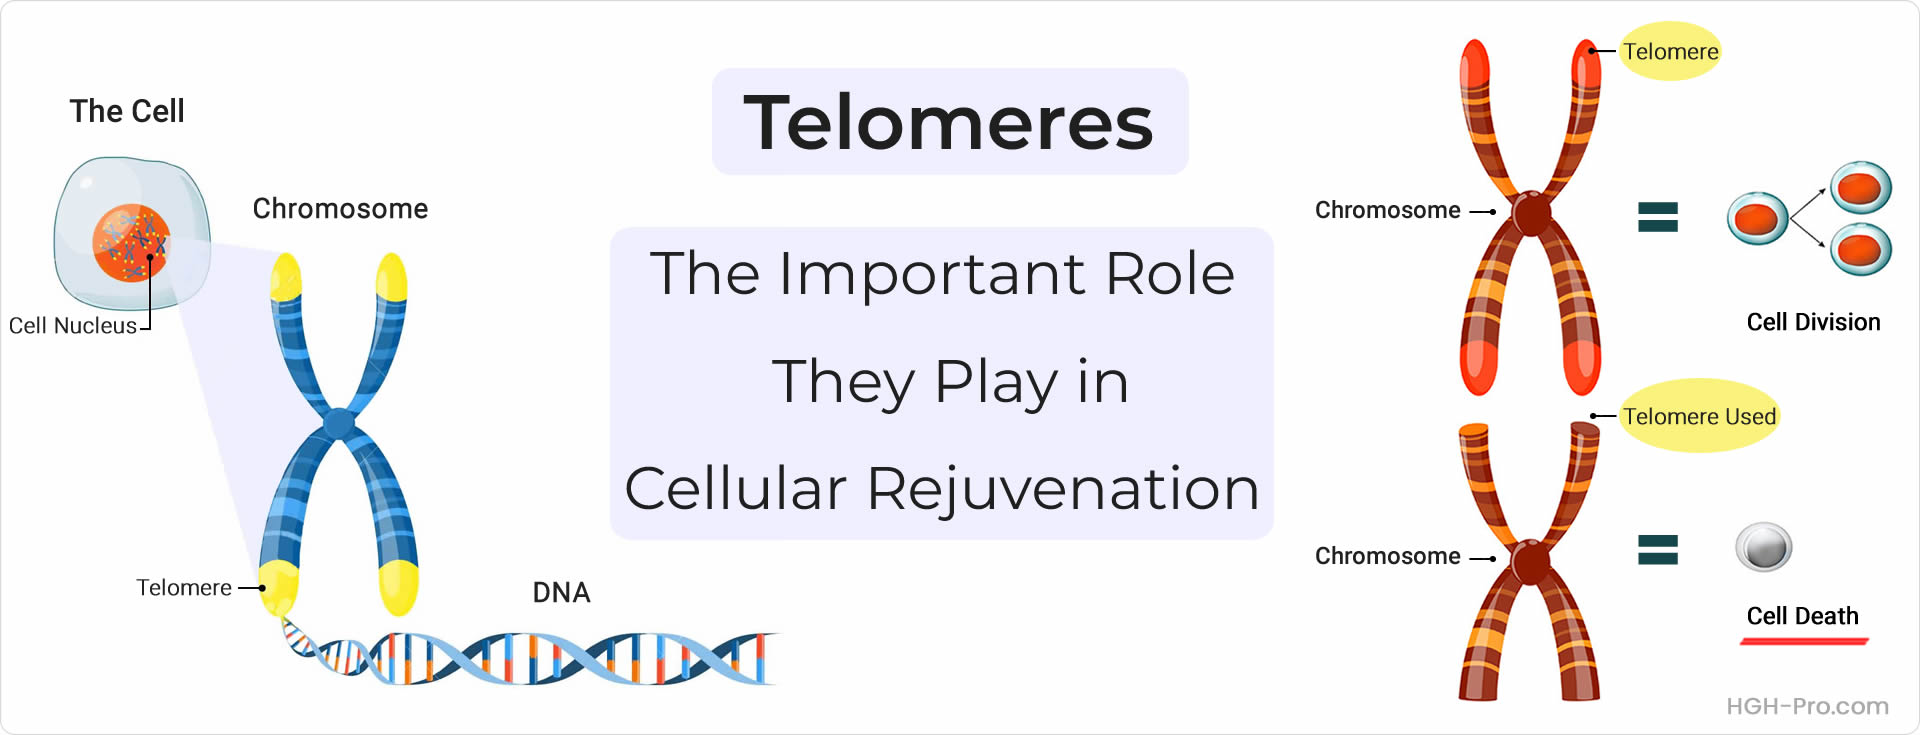 Telomeres and How They Function